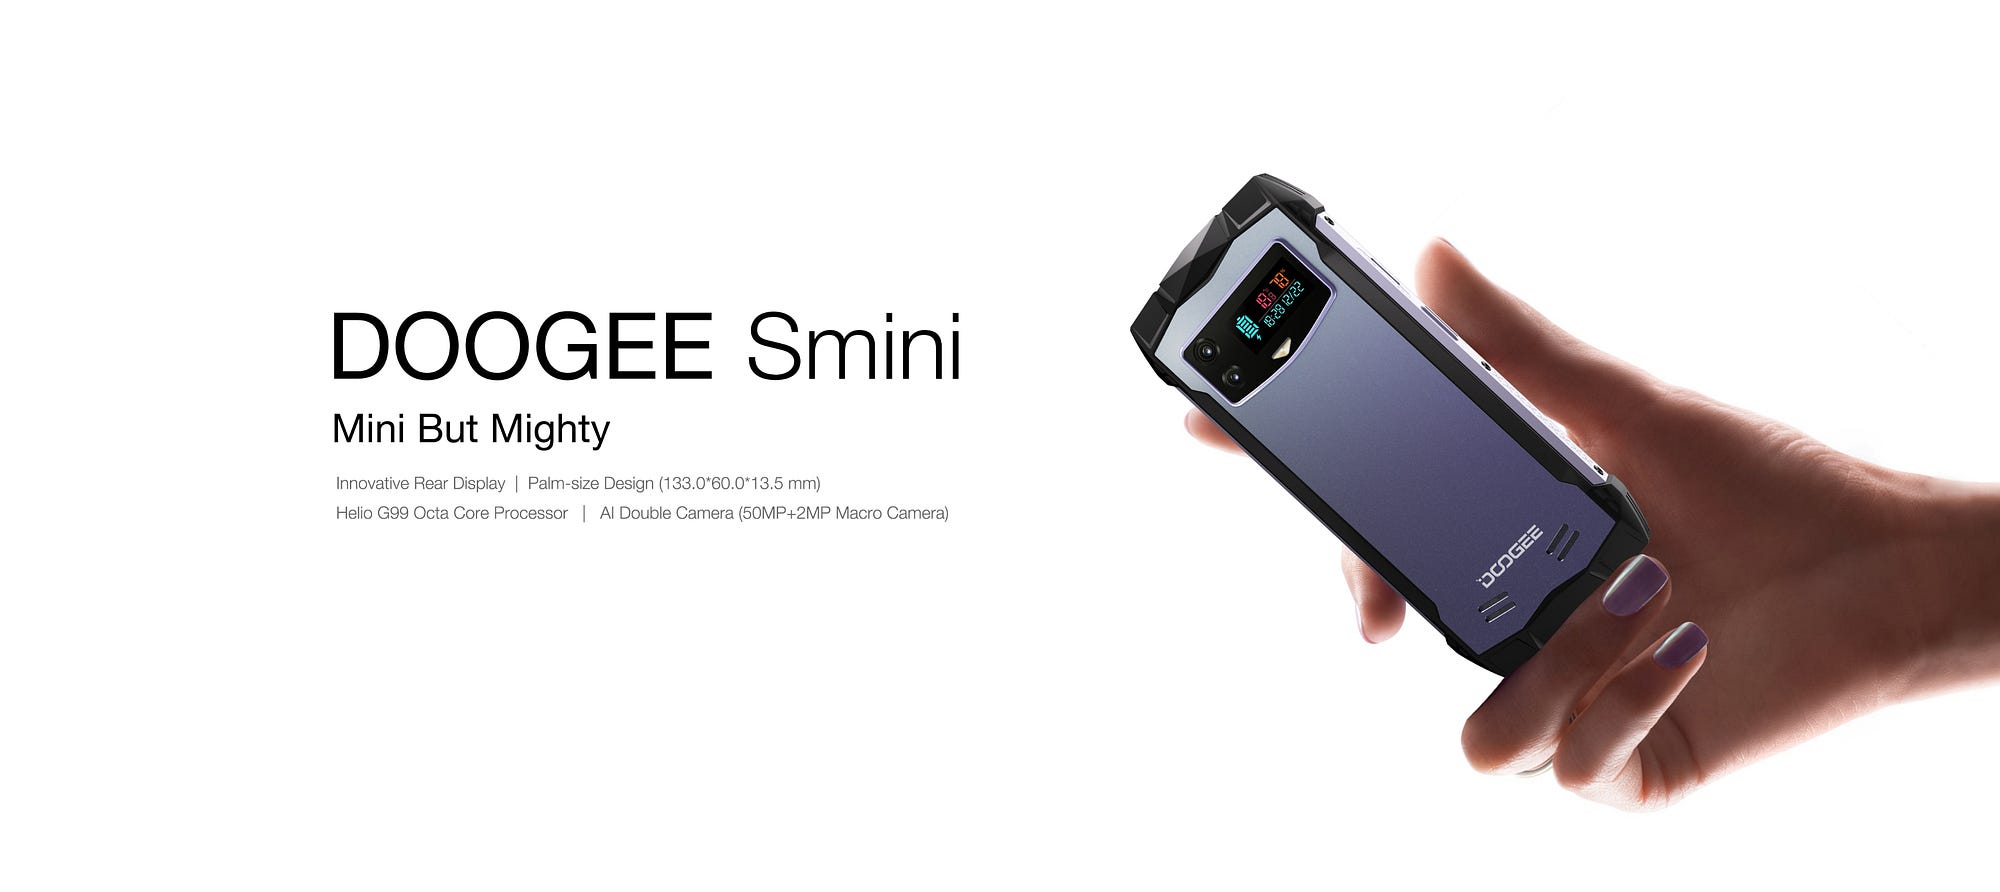 Small Stature, Big Performance: Doogee Smini Packs a Punch, by joshuabrown